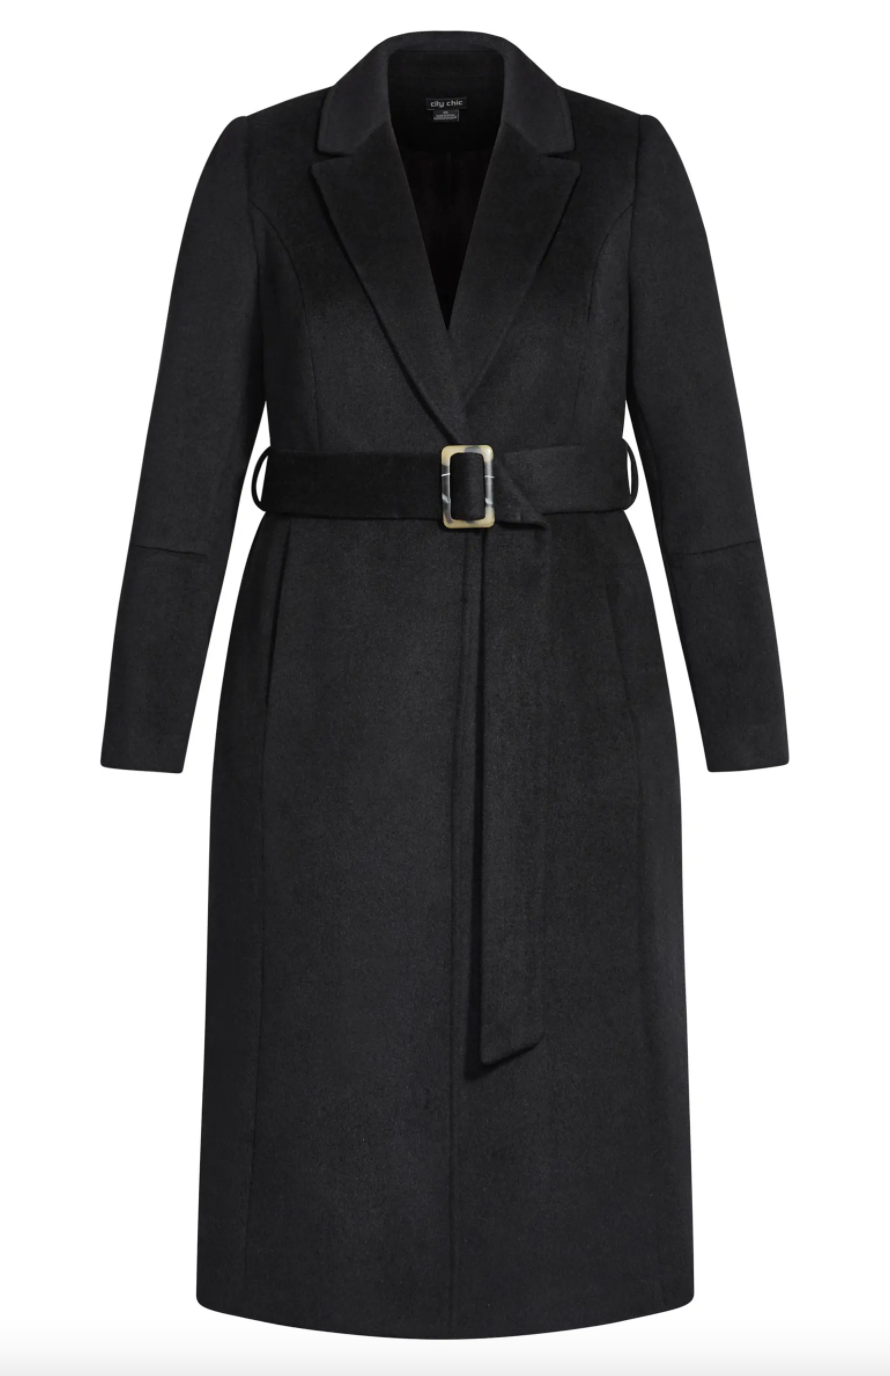 City Chic Belissima Belted Coat in black with belt